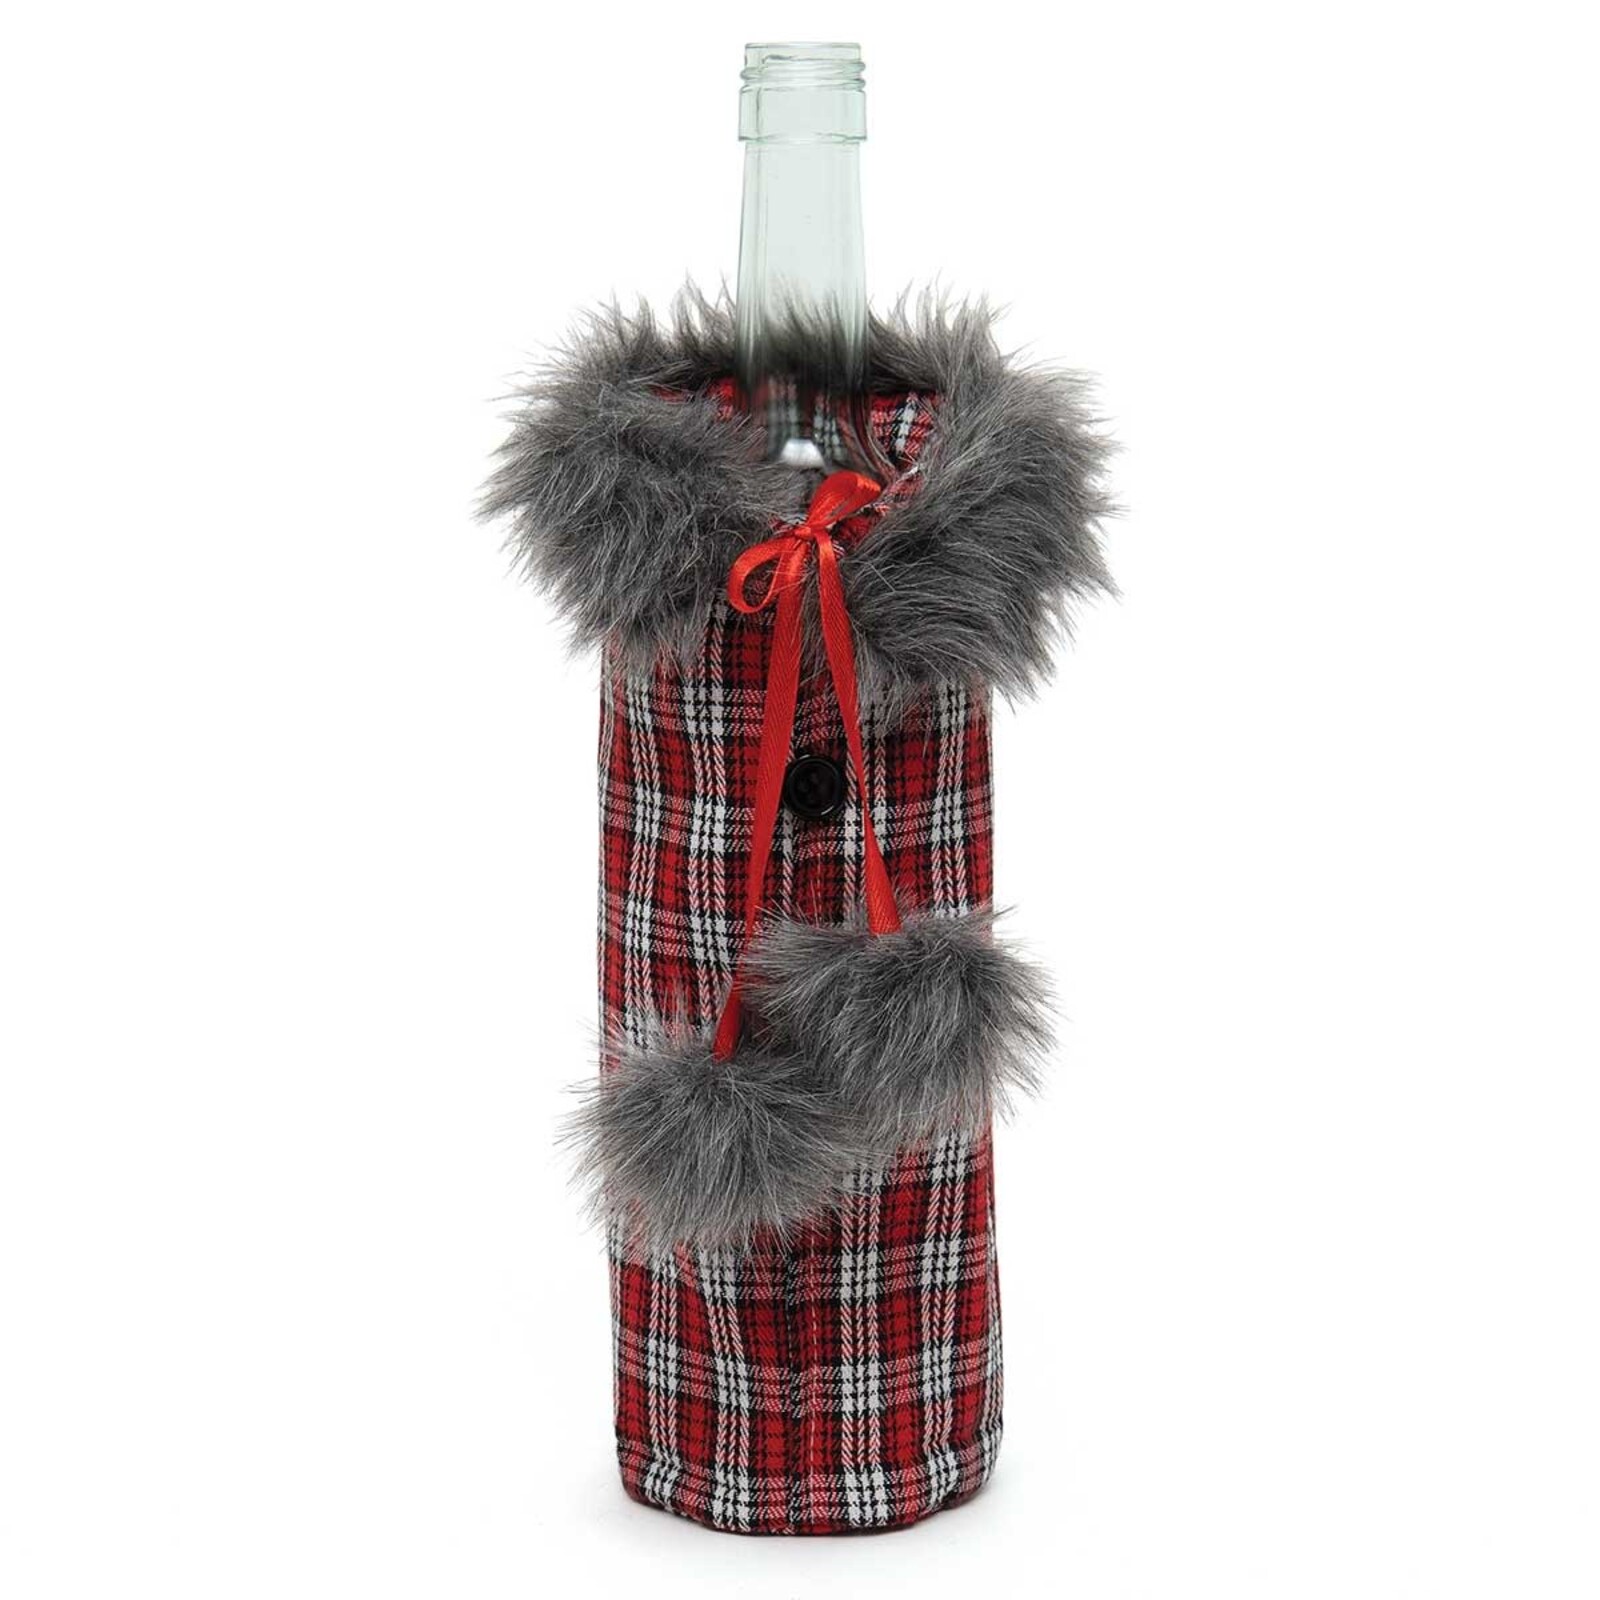 Meravic BOTTLE COAT RED PLAID WITH FUR  R8649 loading=